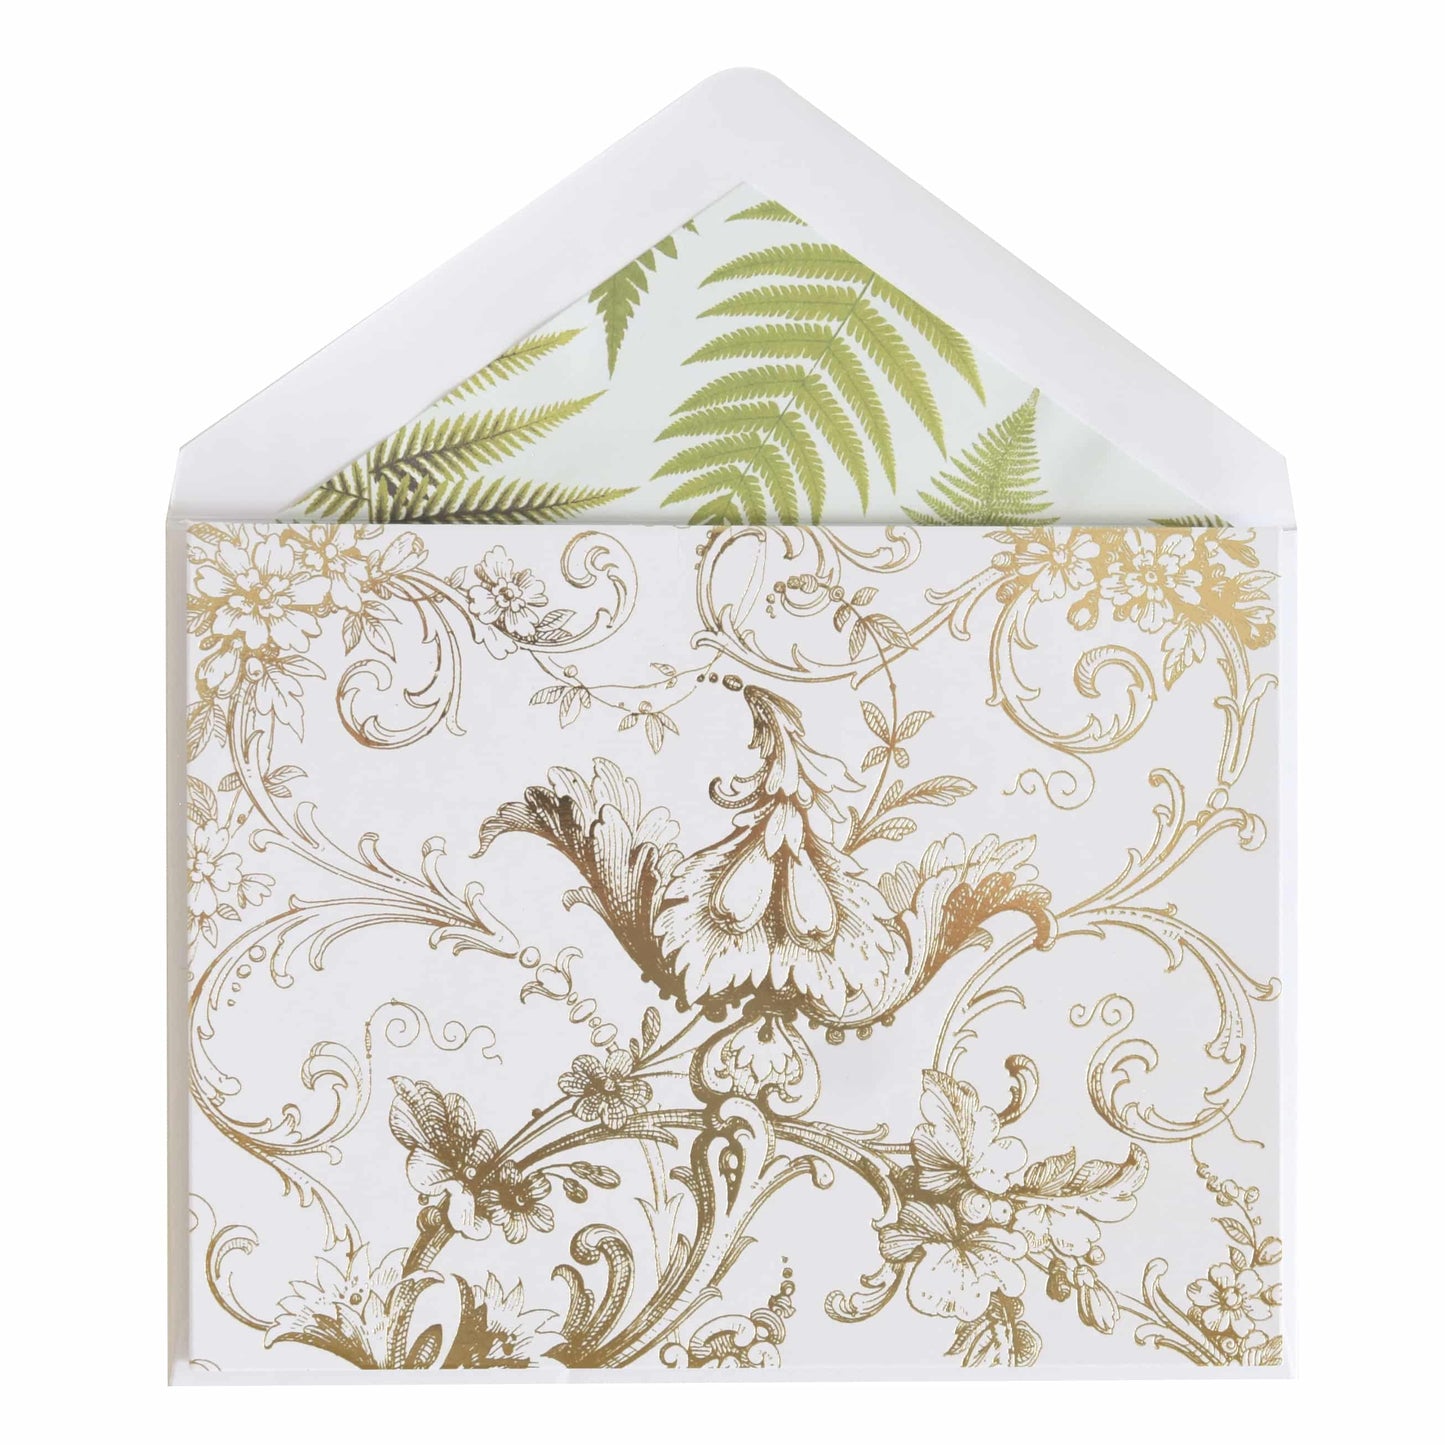 a white envelope with a gold and green floral design.